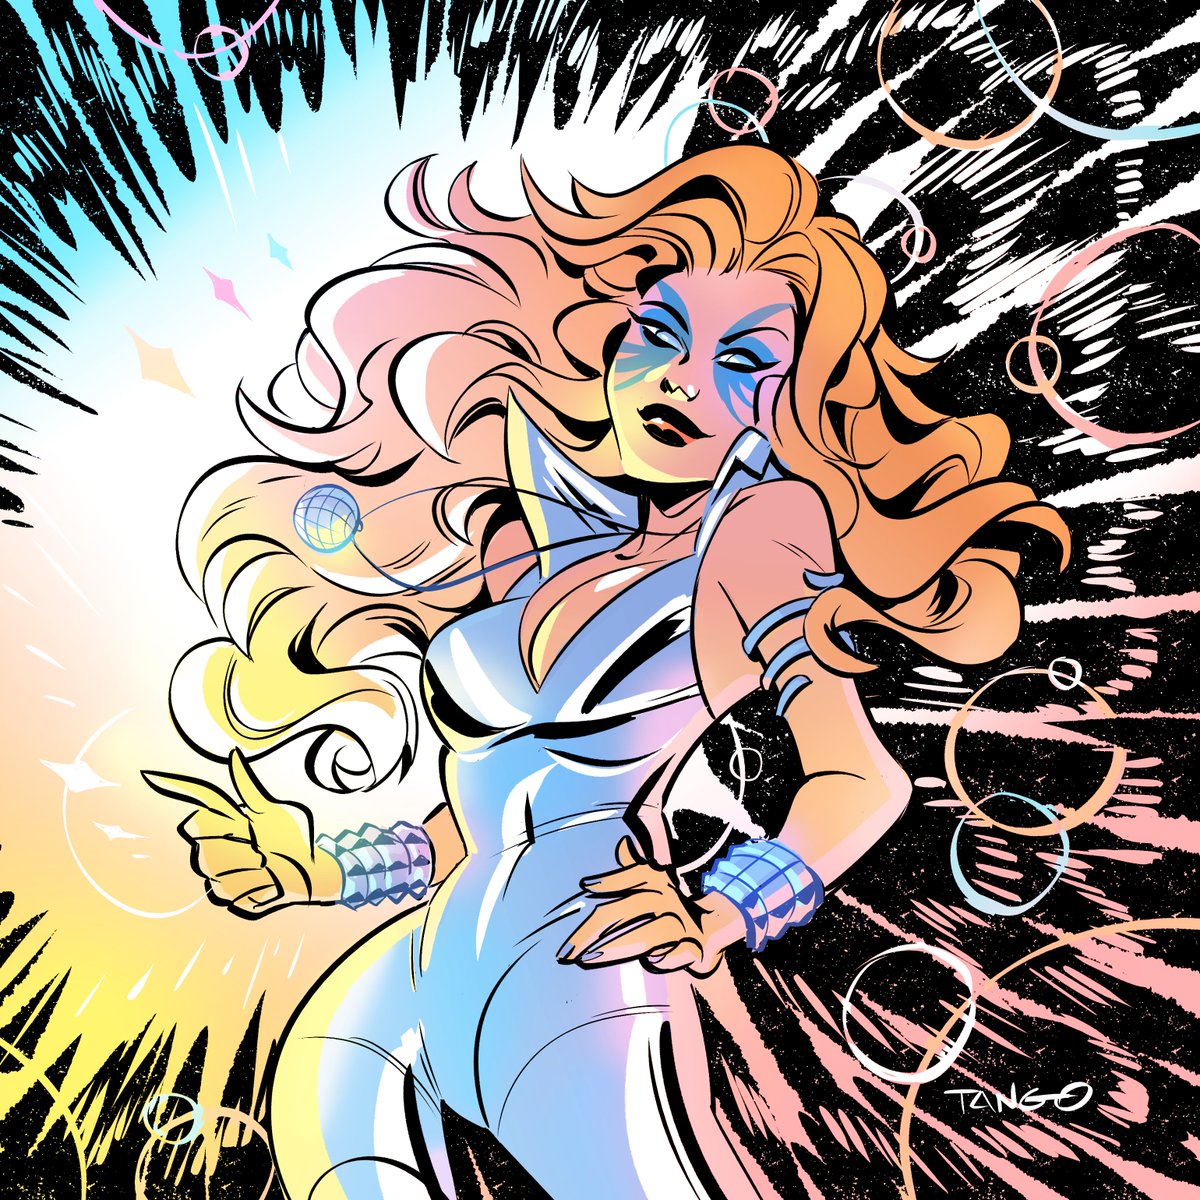 A classic for my girl Dazzler, shooting from the hip✨ -